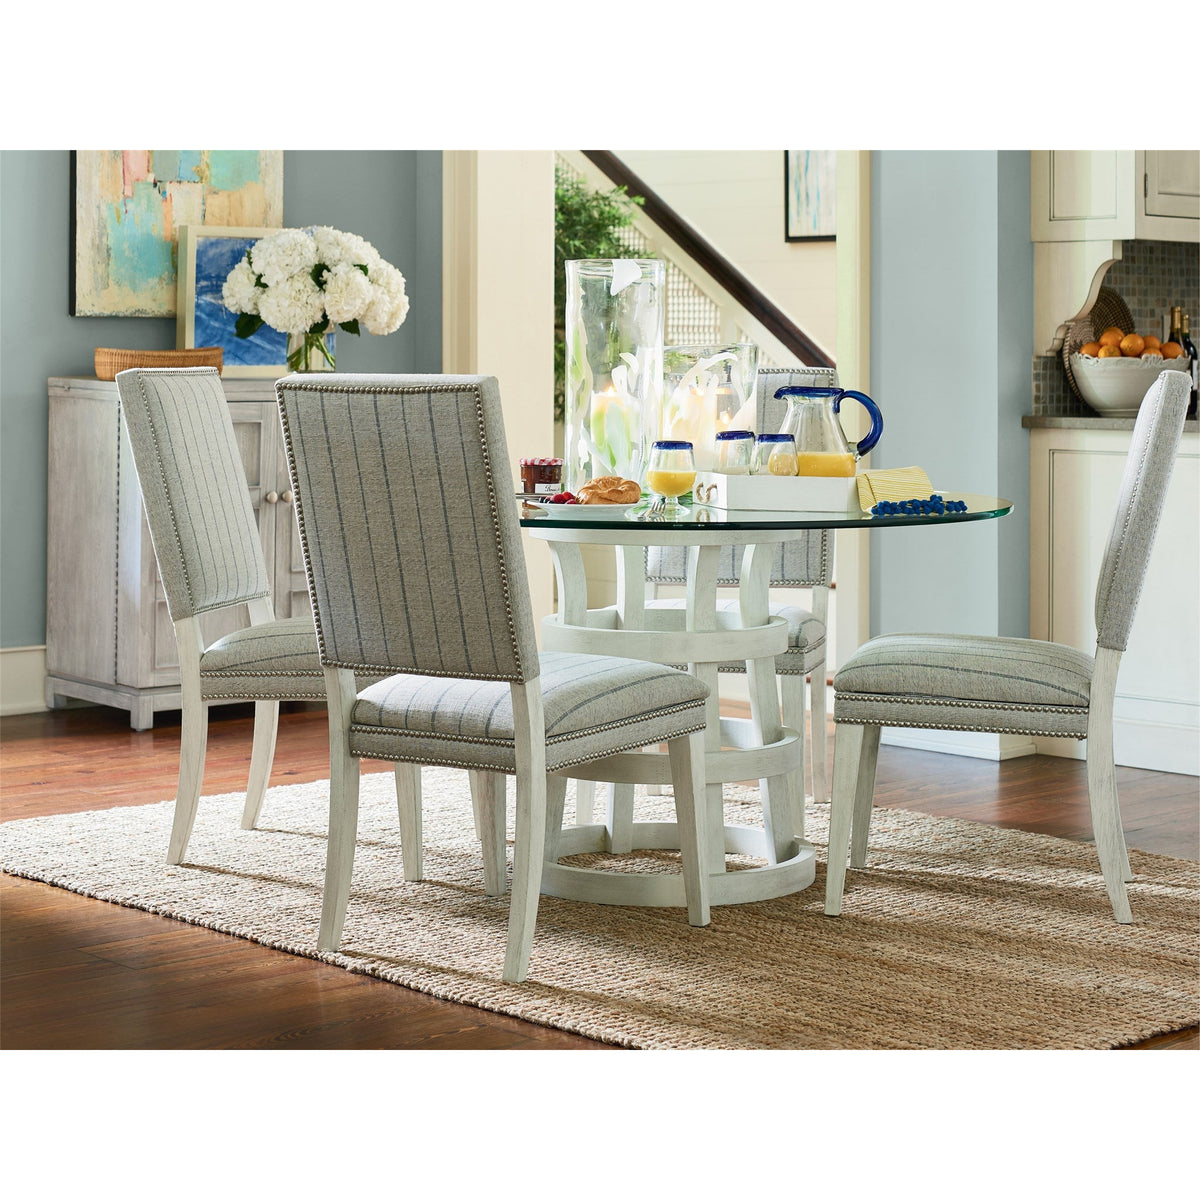 Hamptons Dining Chair - Be Bold Furniture